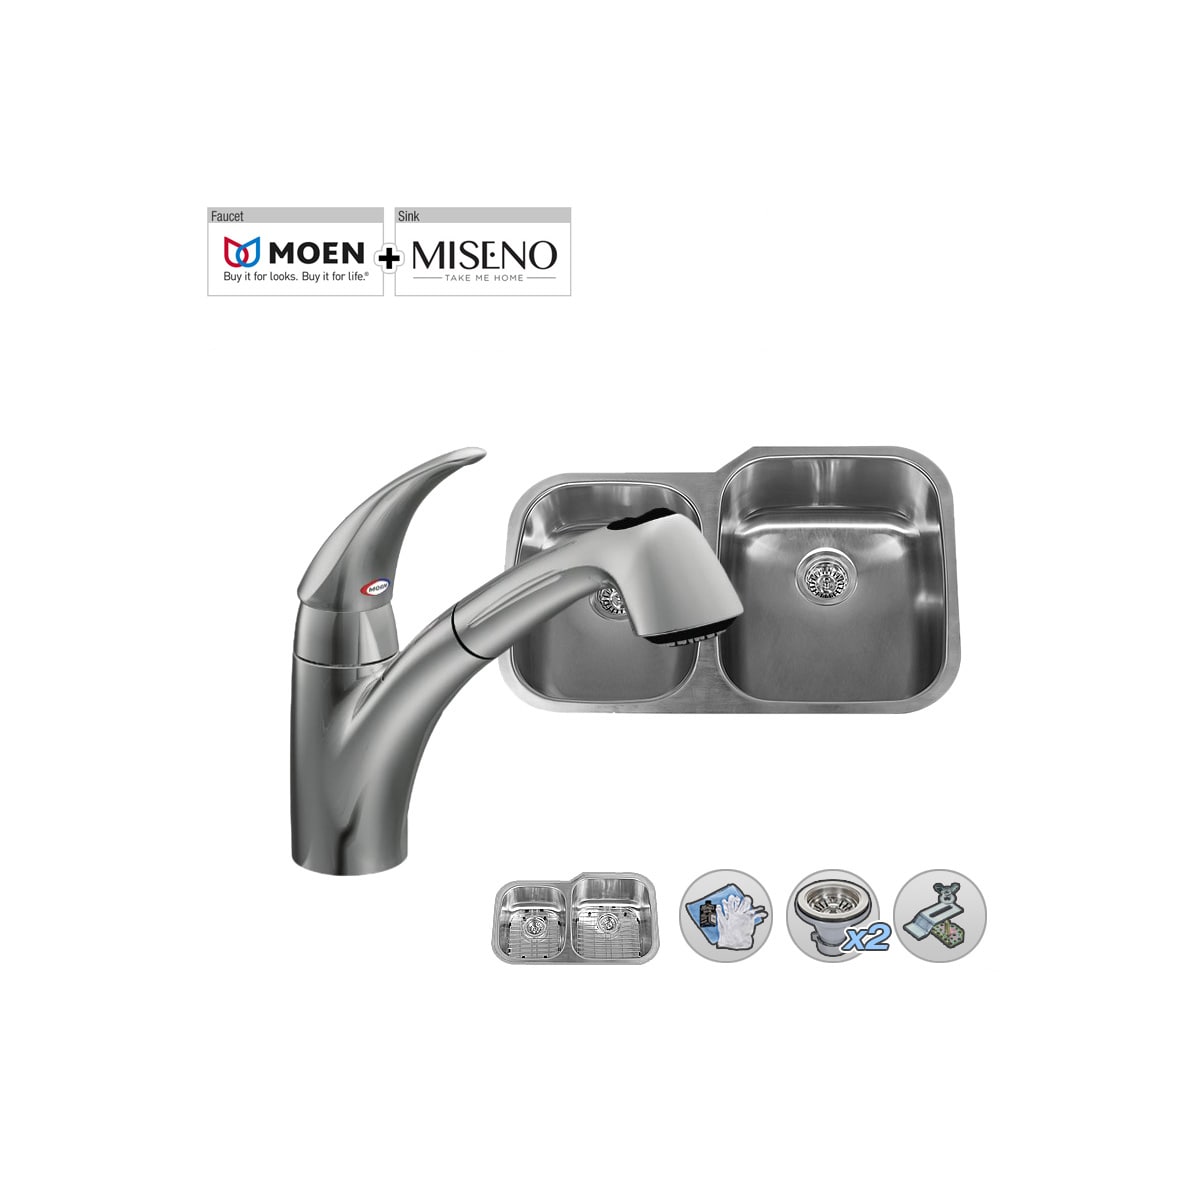 Build Smart Kits Mss163220c4060 M7560 Cs Classic Stainless Faucet